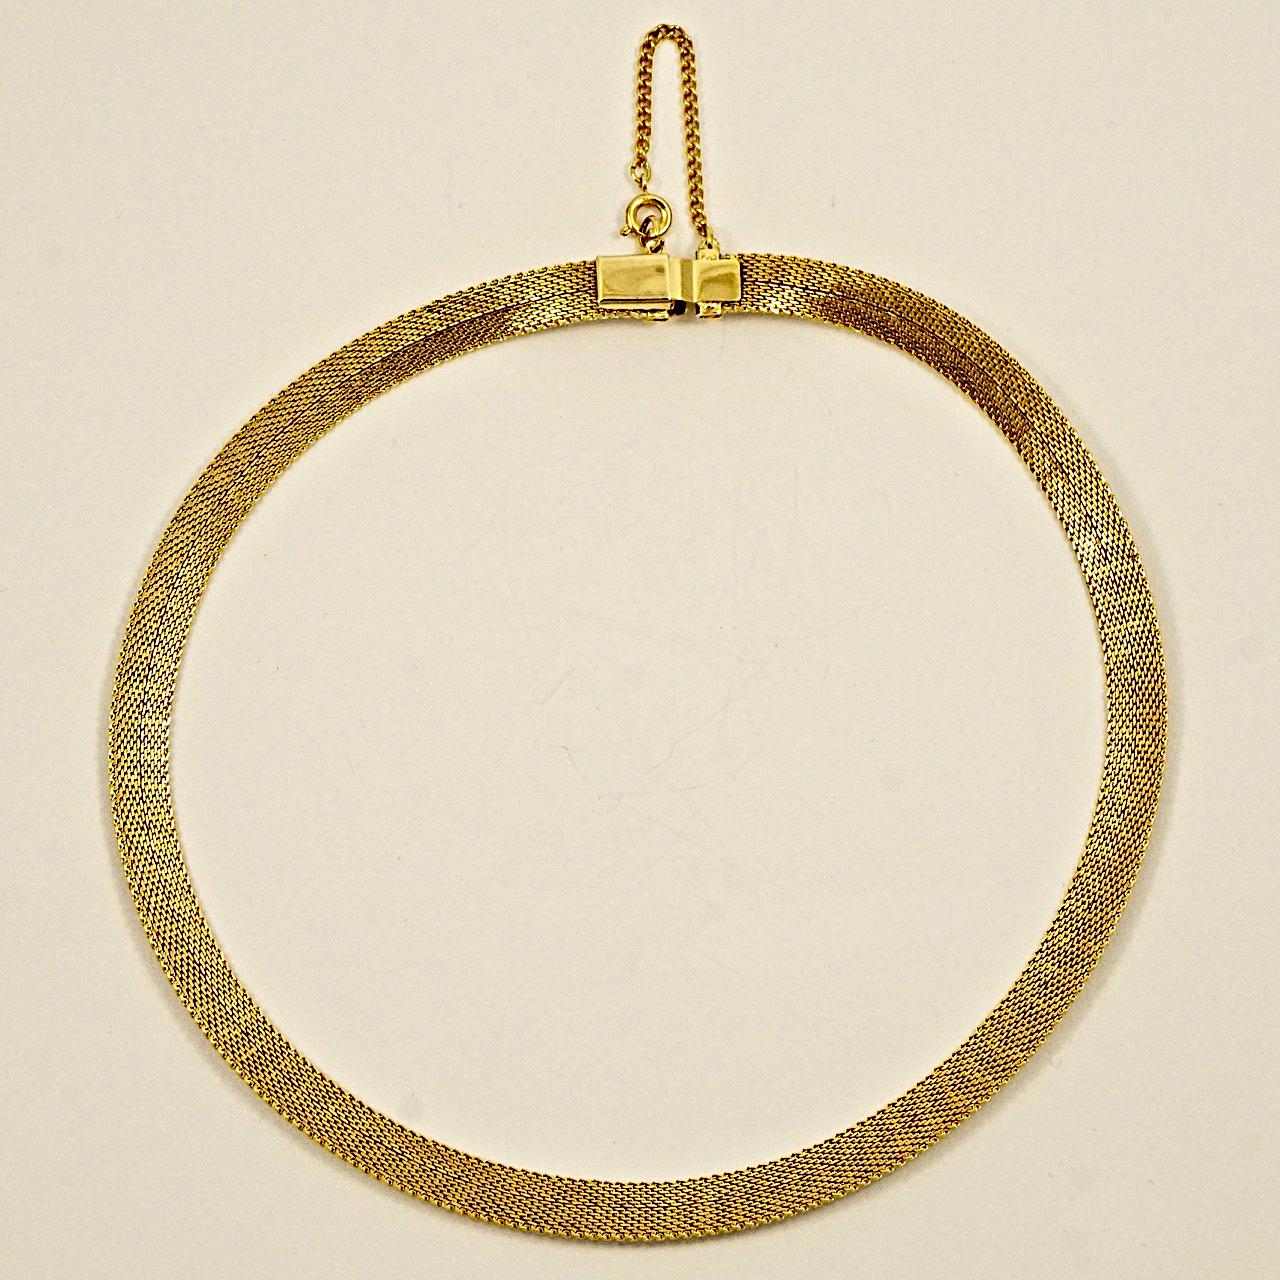 Gold Plated Textured Design Mesh Collar Necklace circa 1980s For Sale 2